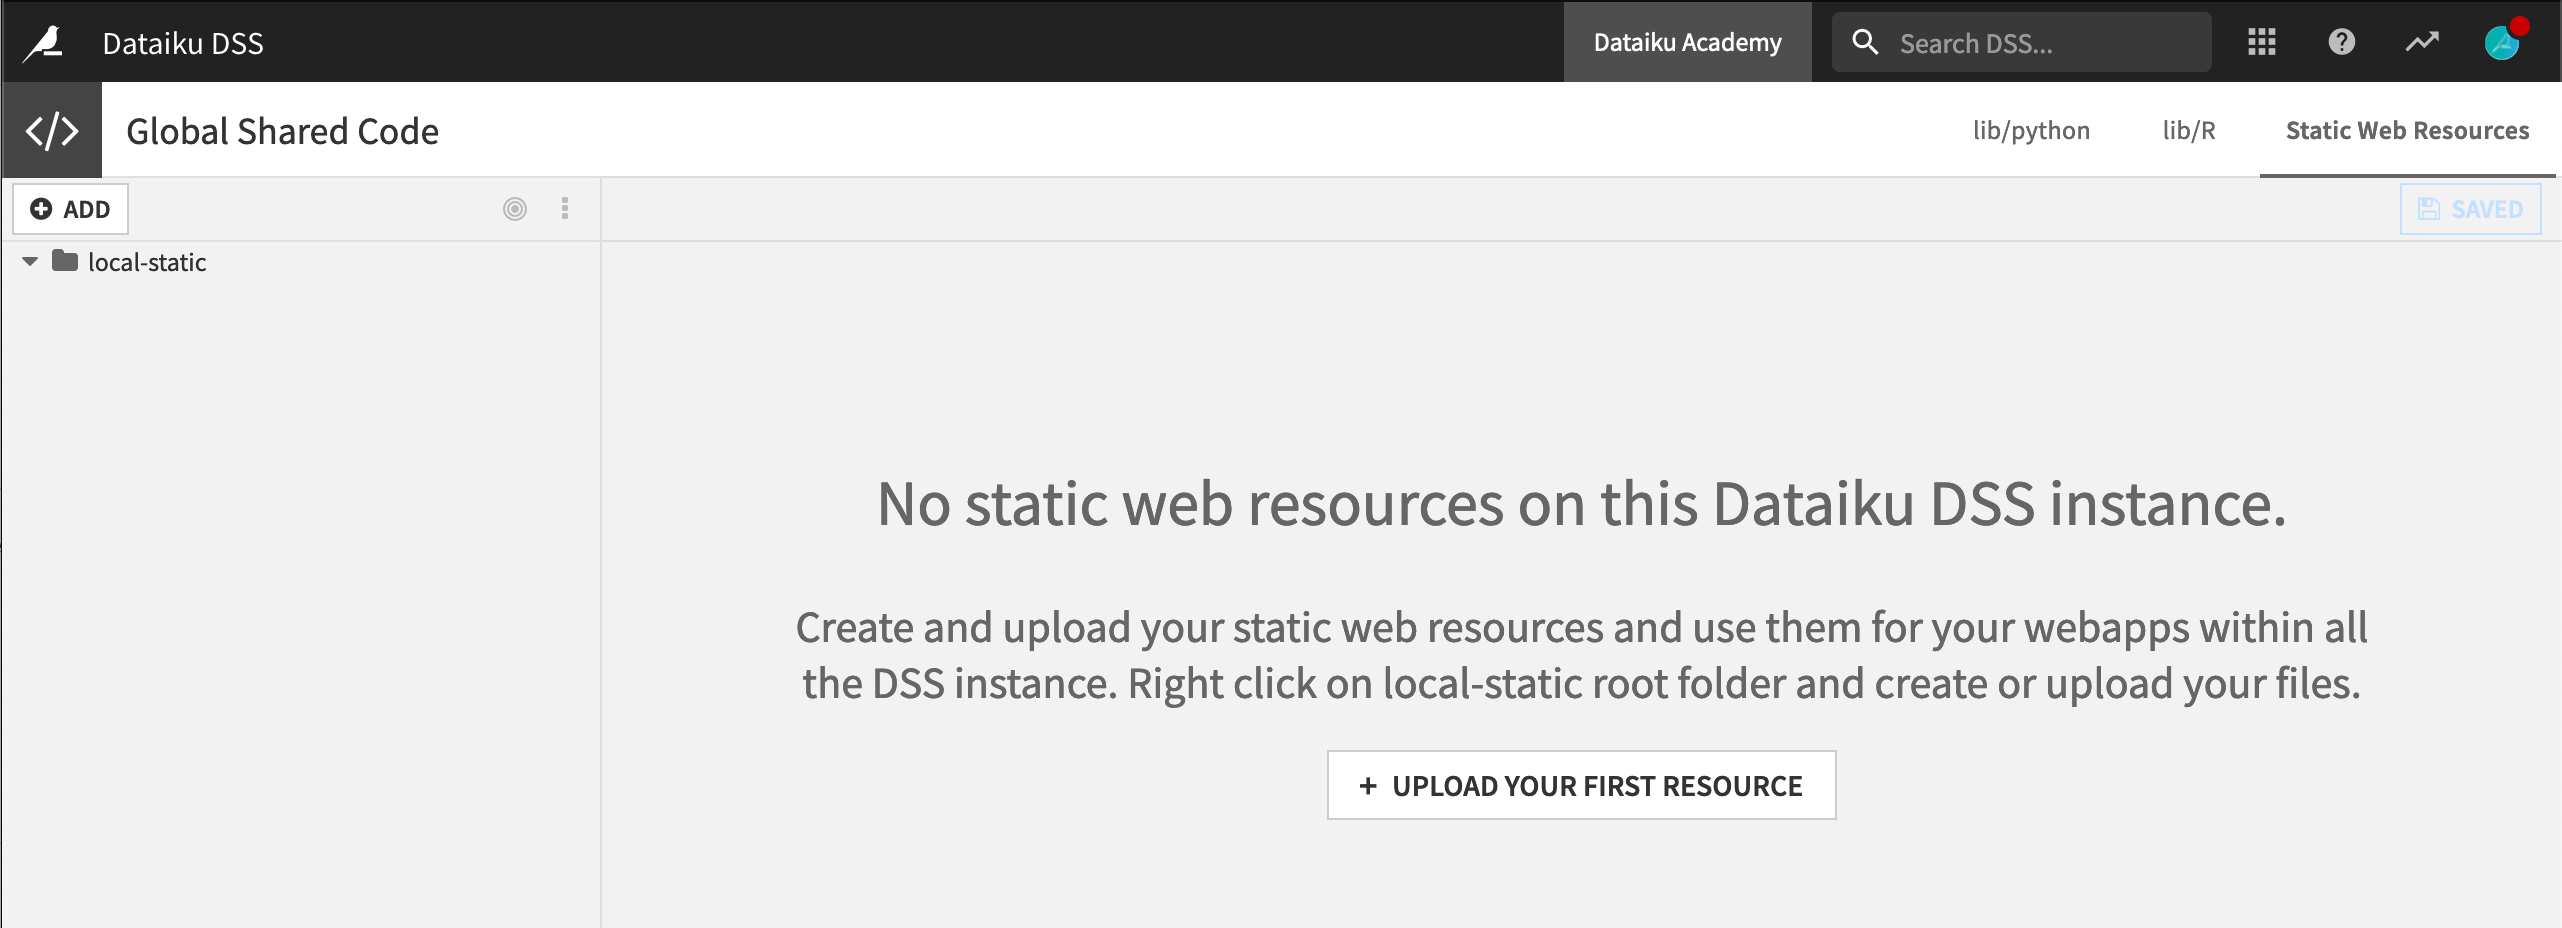 Dataiku screenshot of the Static Web Resources tab of the Global Shared Code page.